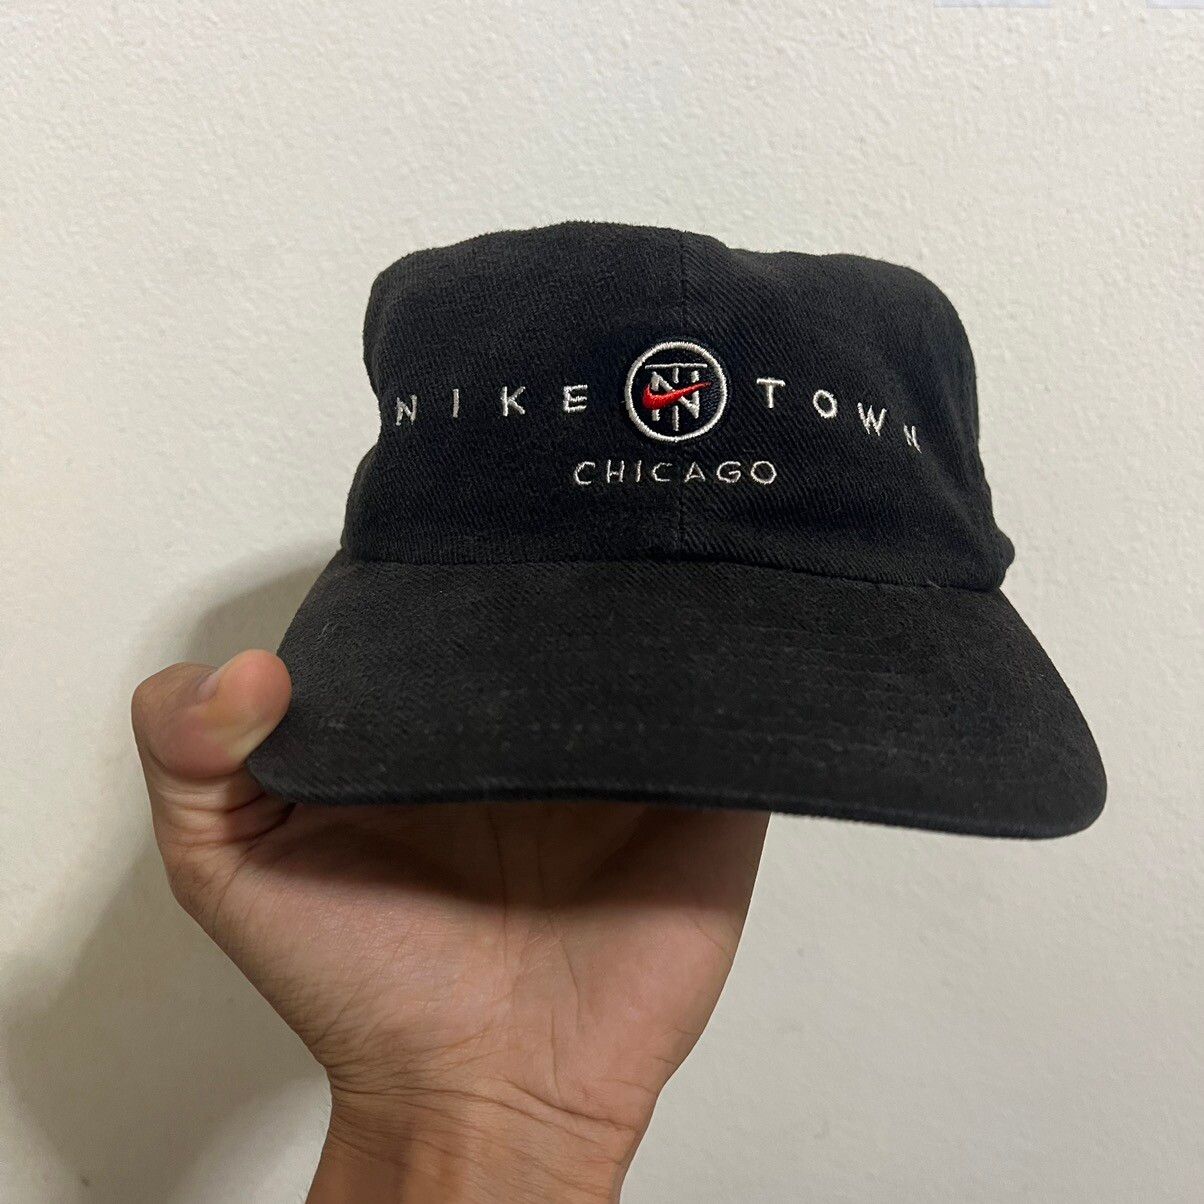 Vintage Nike Town Chicago hat - 1